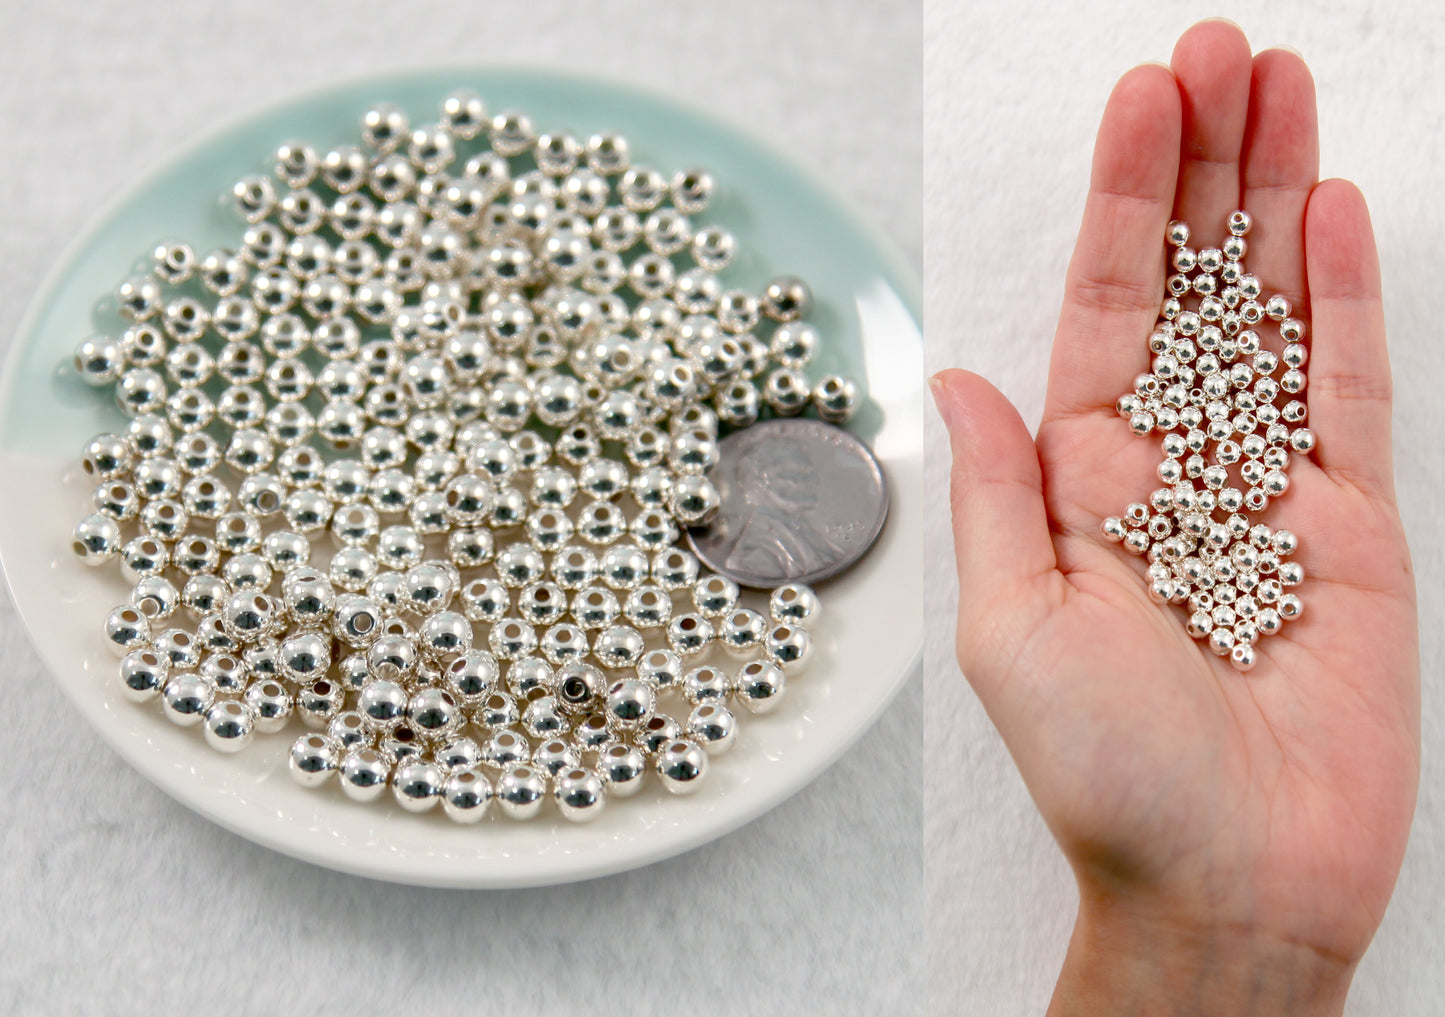 Spacer Beads - 300 pcs - 5mm Electroplated Silver Plastic Spacer Beads - Super Lightweight - Easily use to make any kind of jewelry